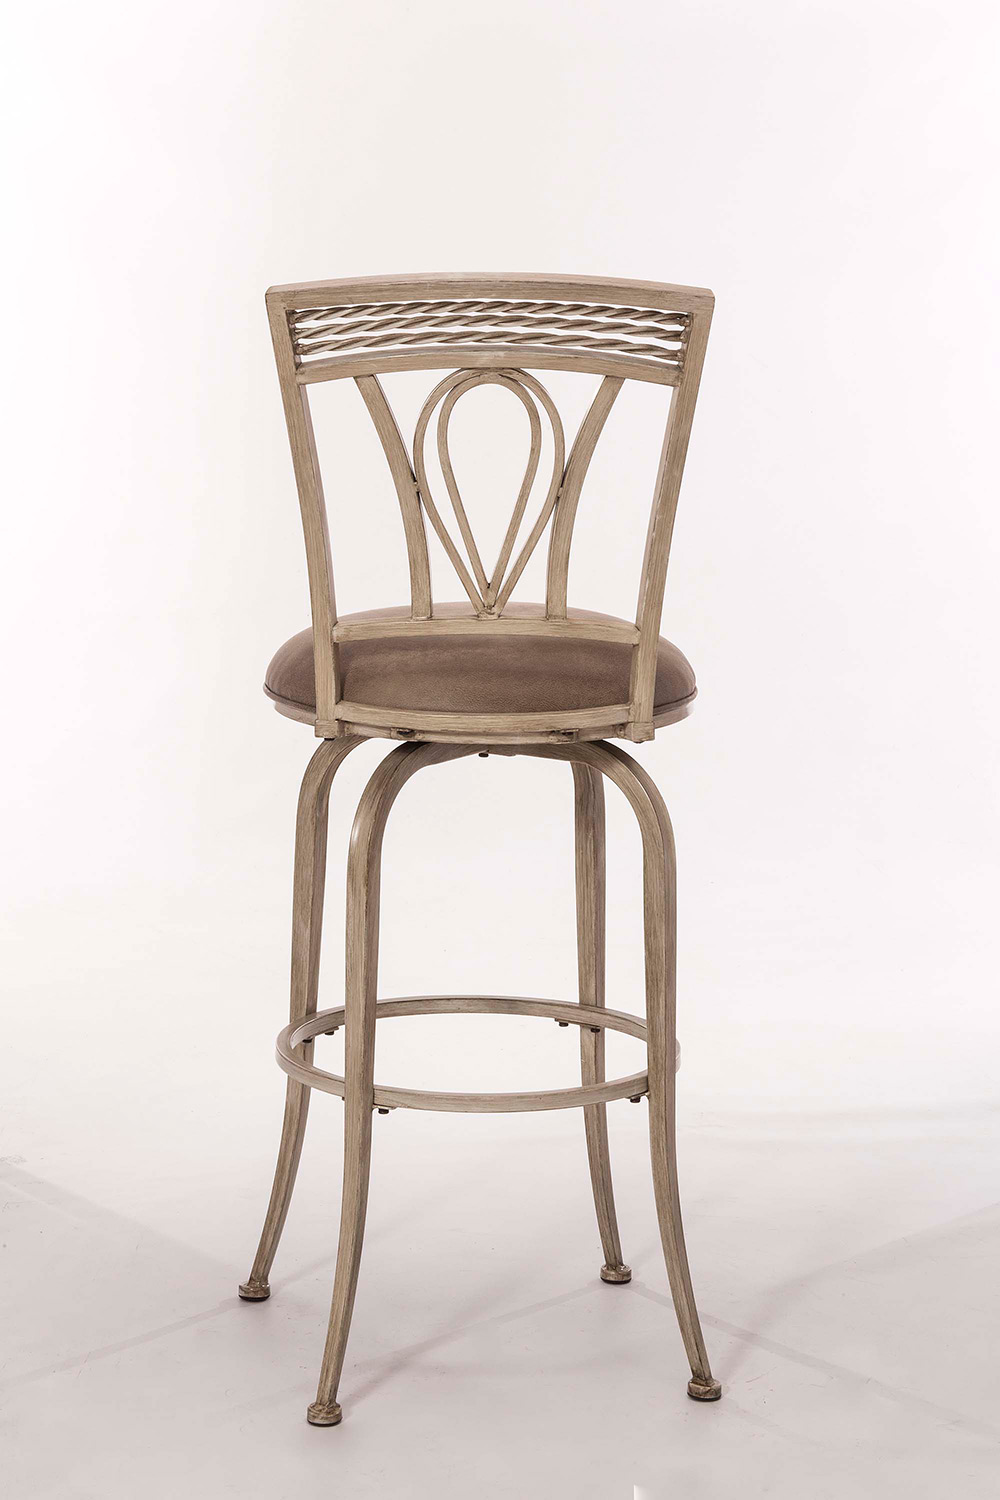 Hillsdale Napier Swivel Counter Stool - Aged Ivory